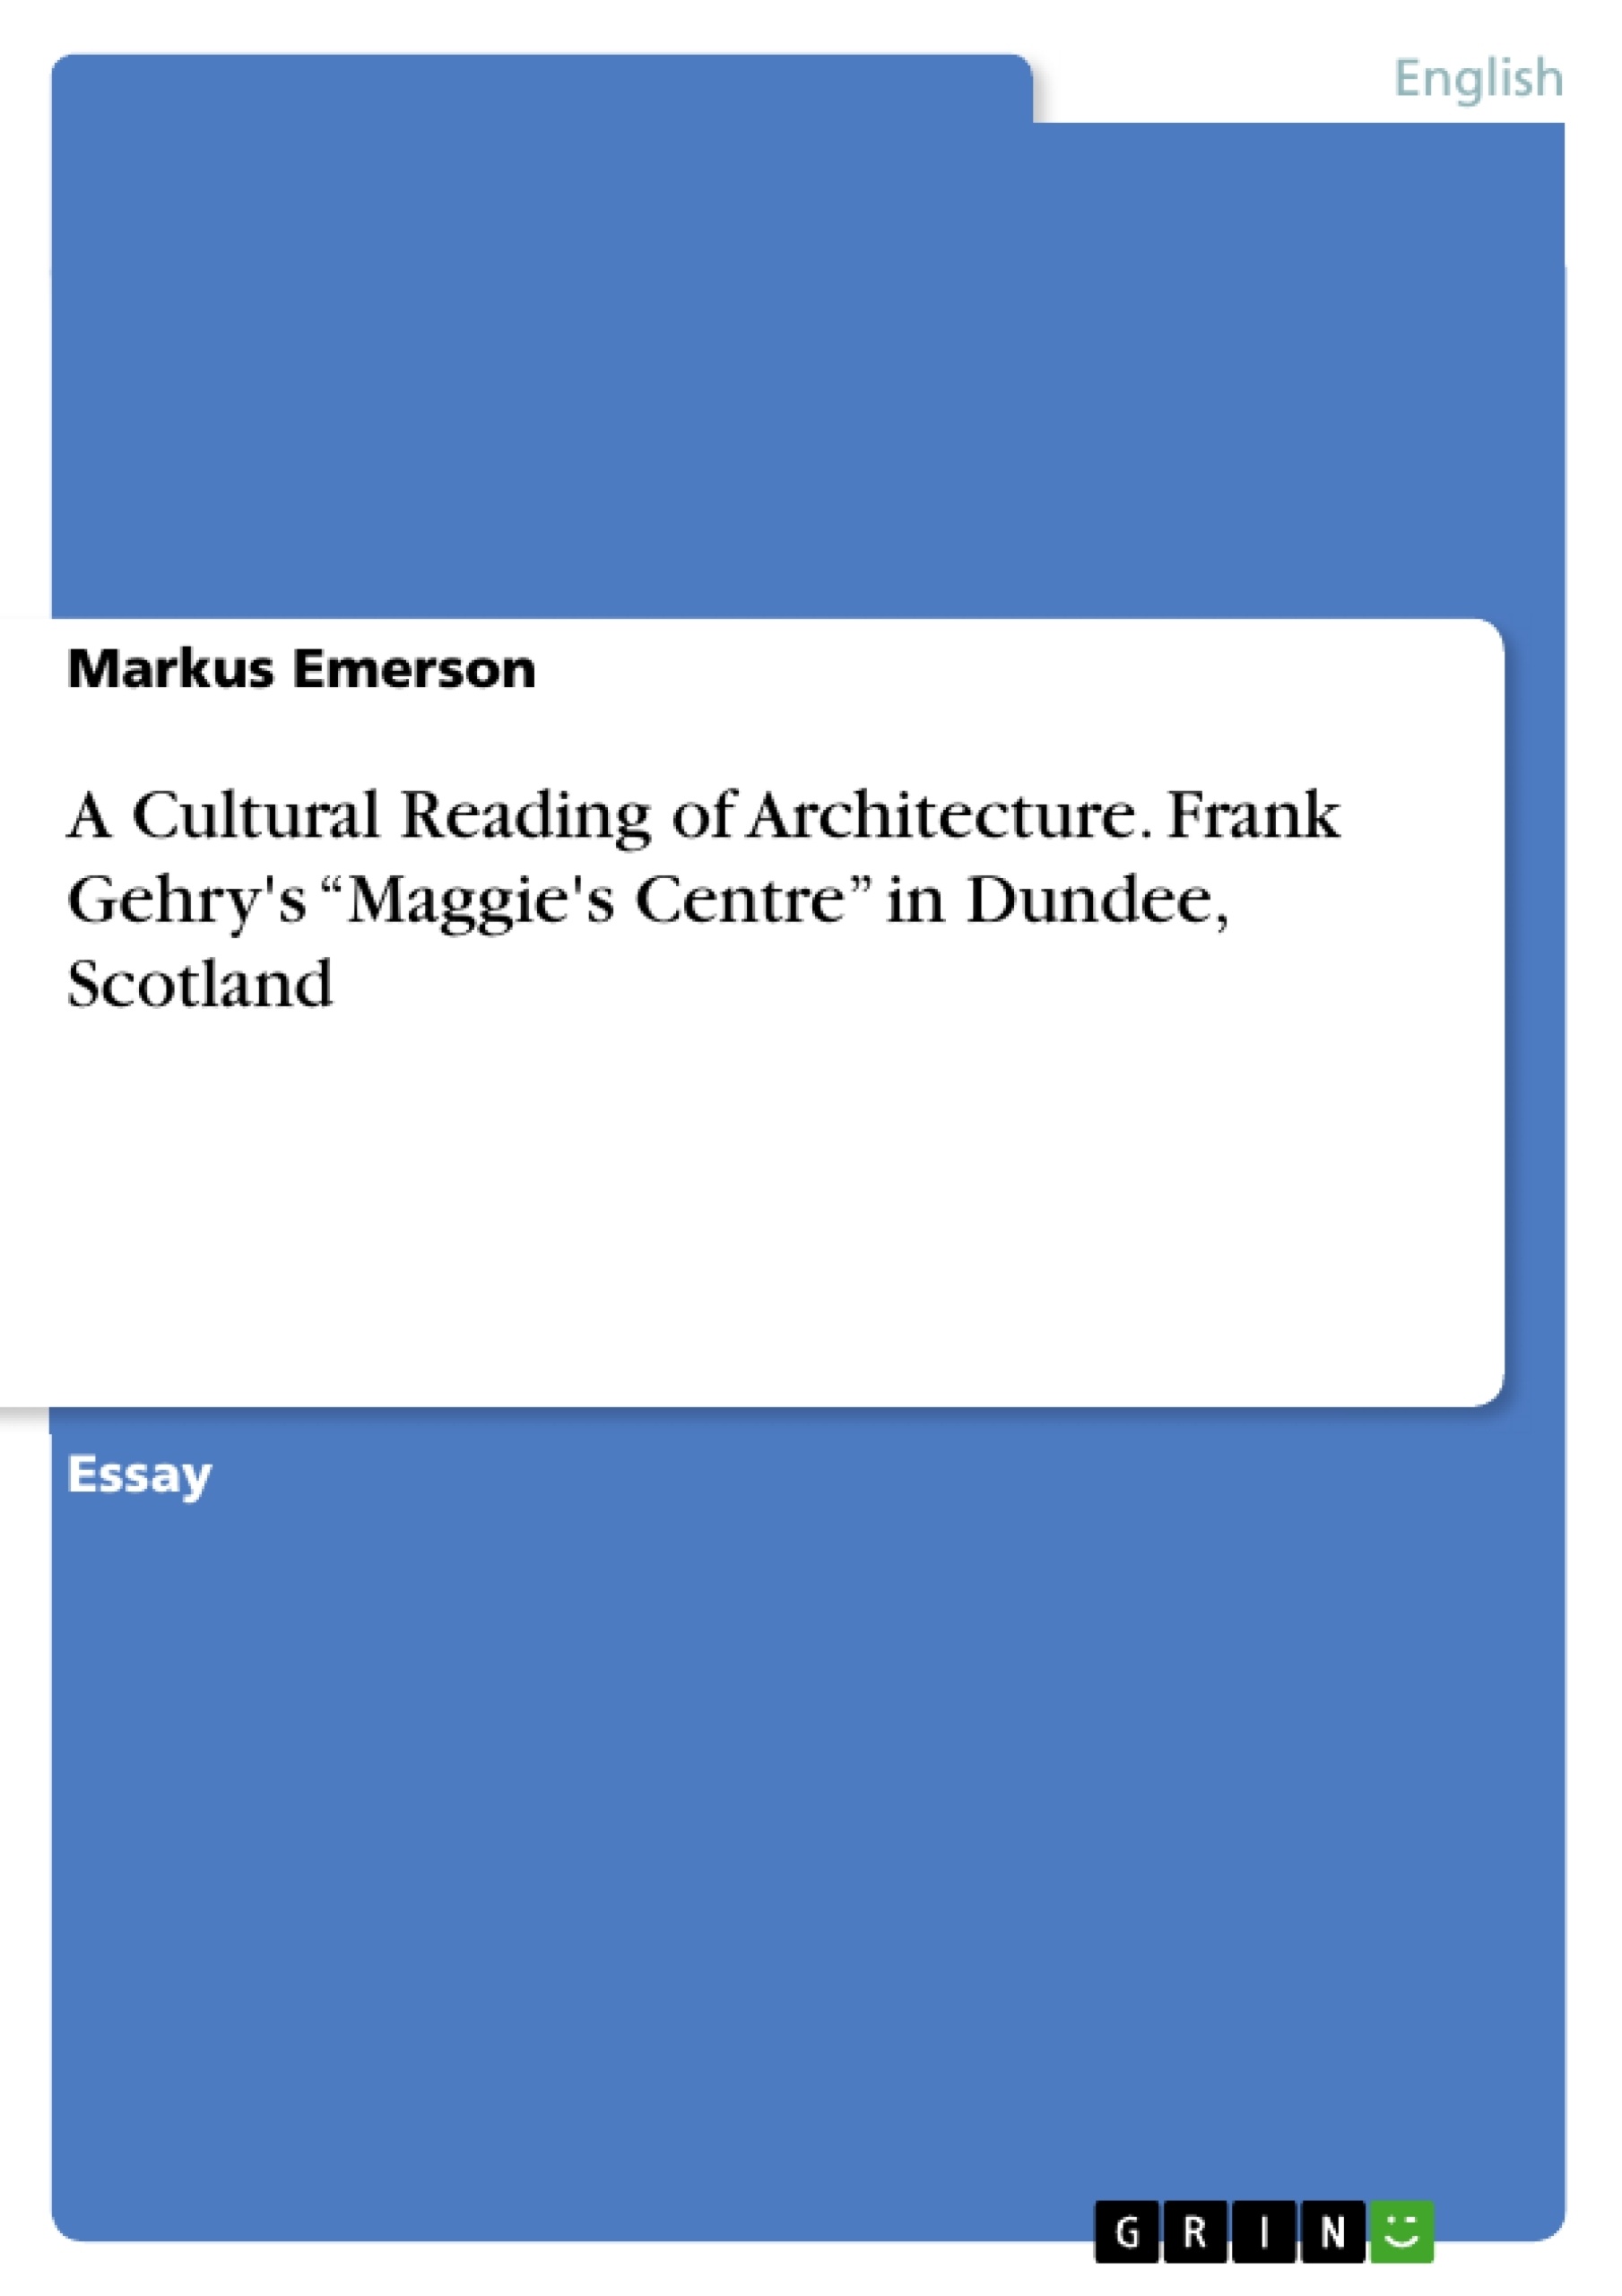 Title: A Cultural Reading of Architecture. Frank Gehry's “Maggie's Centre” in Dundee, Scotland